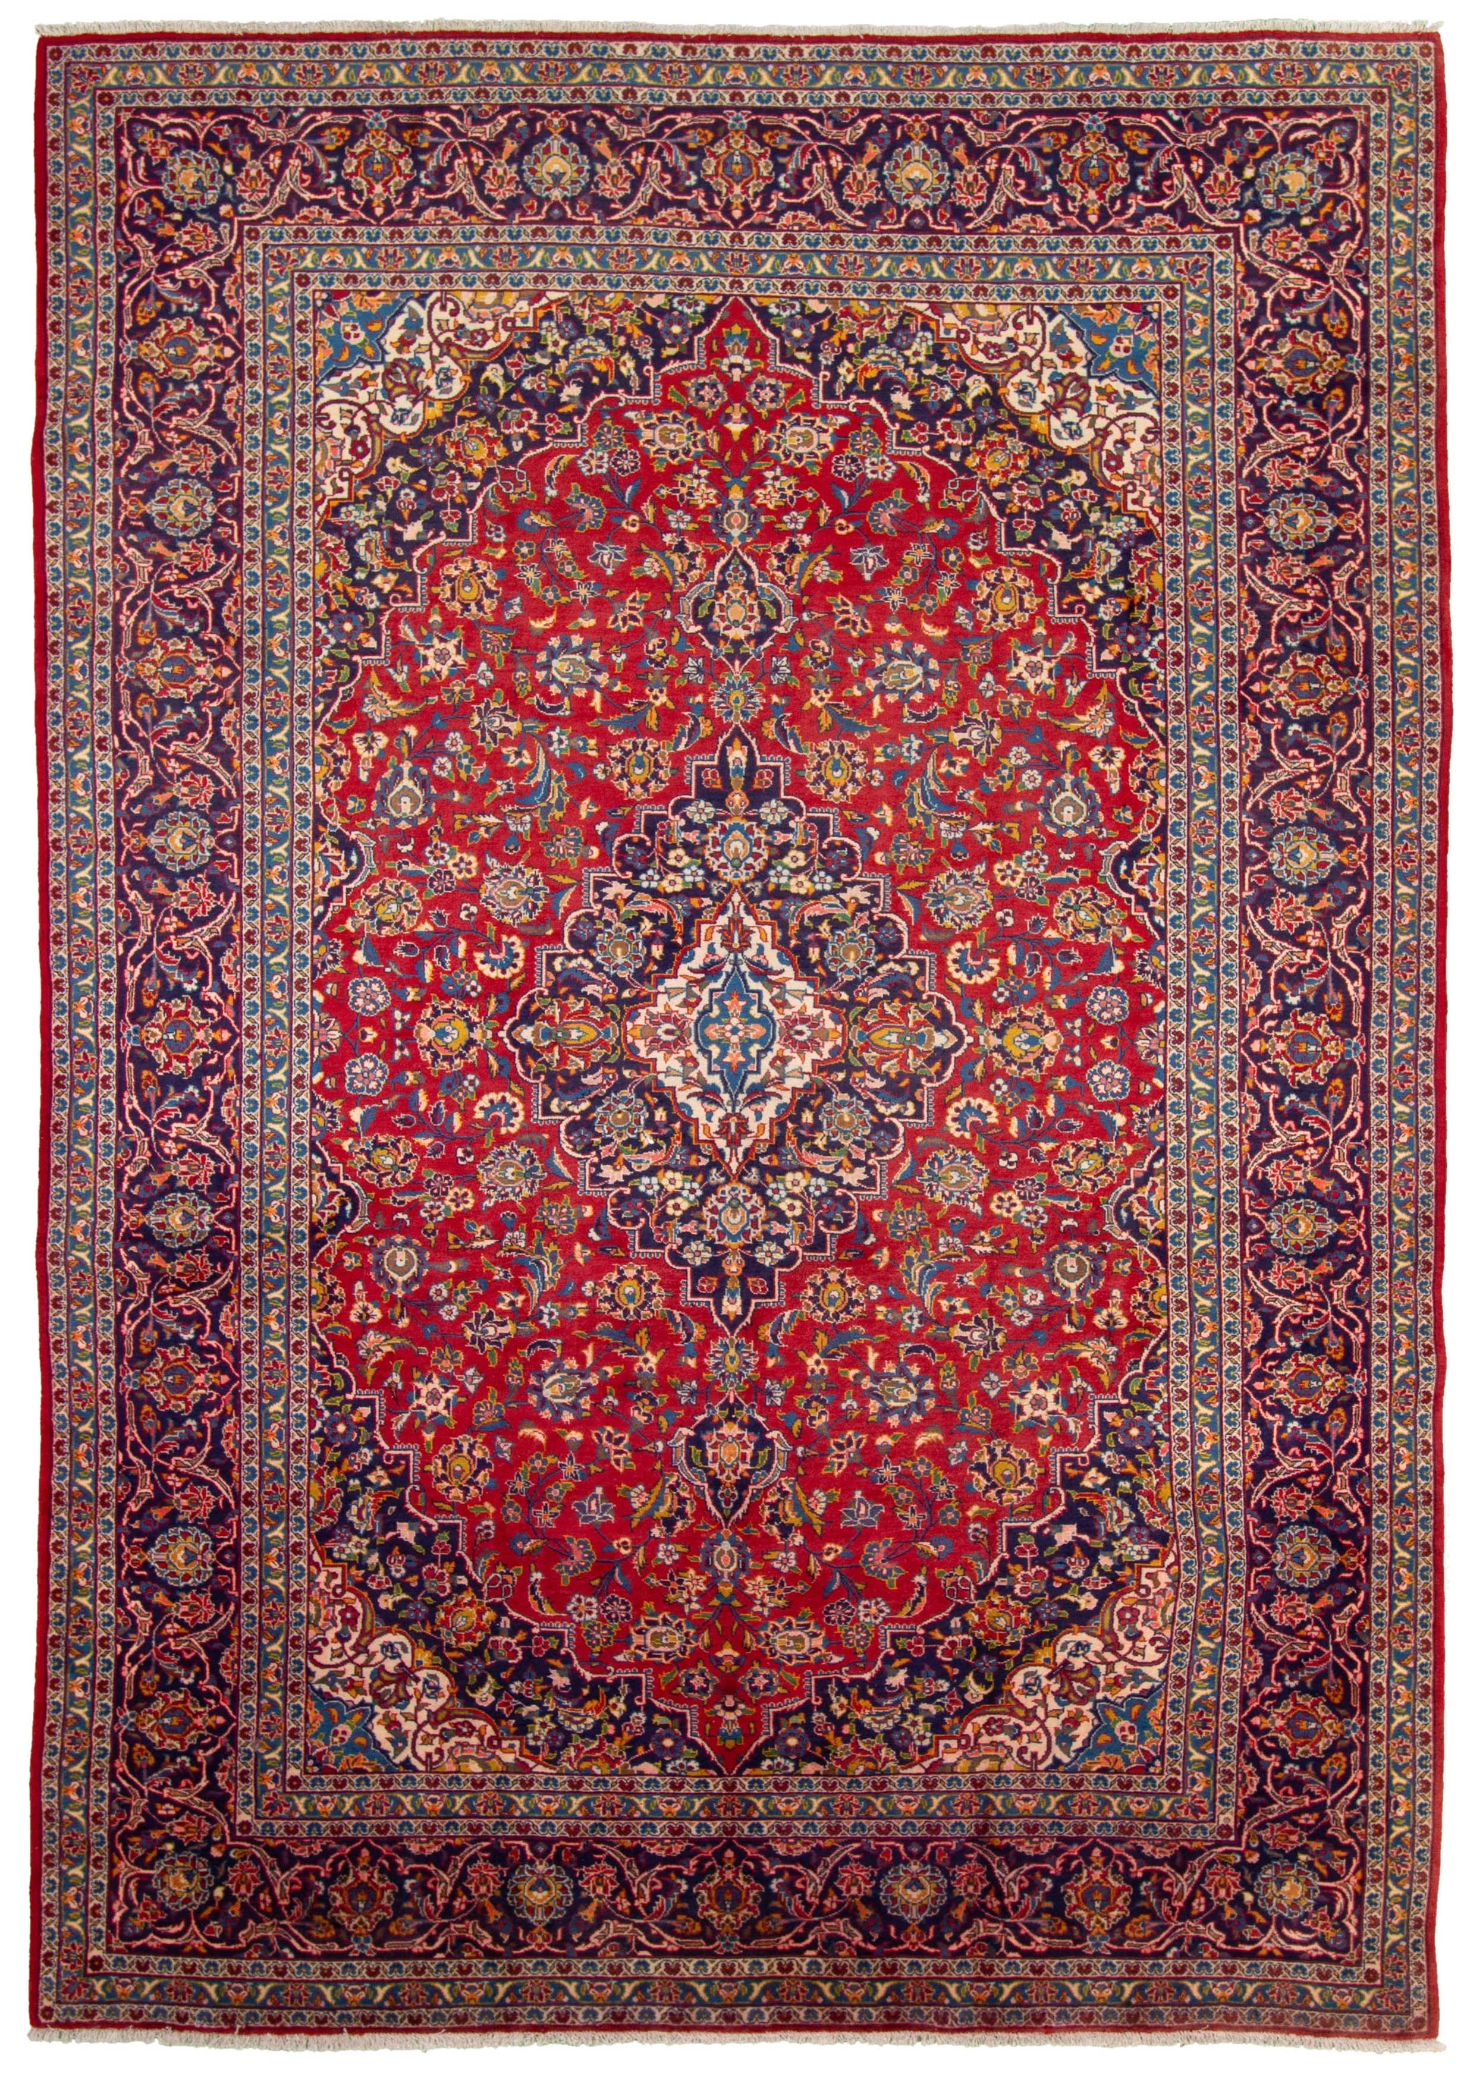 Hand-knotted>Iran>Kashan (15) Size: 9'11" x 13'11"  